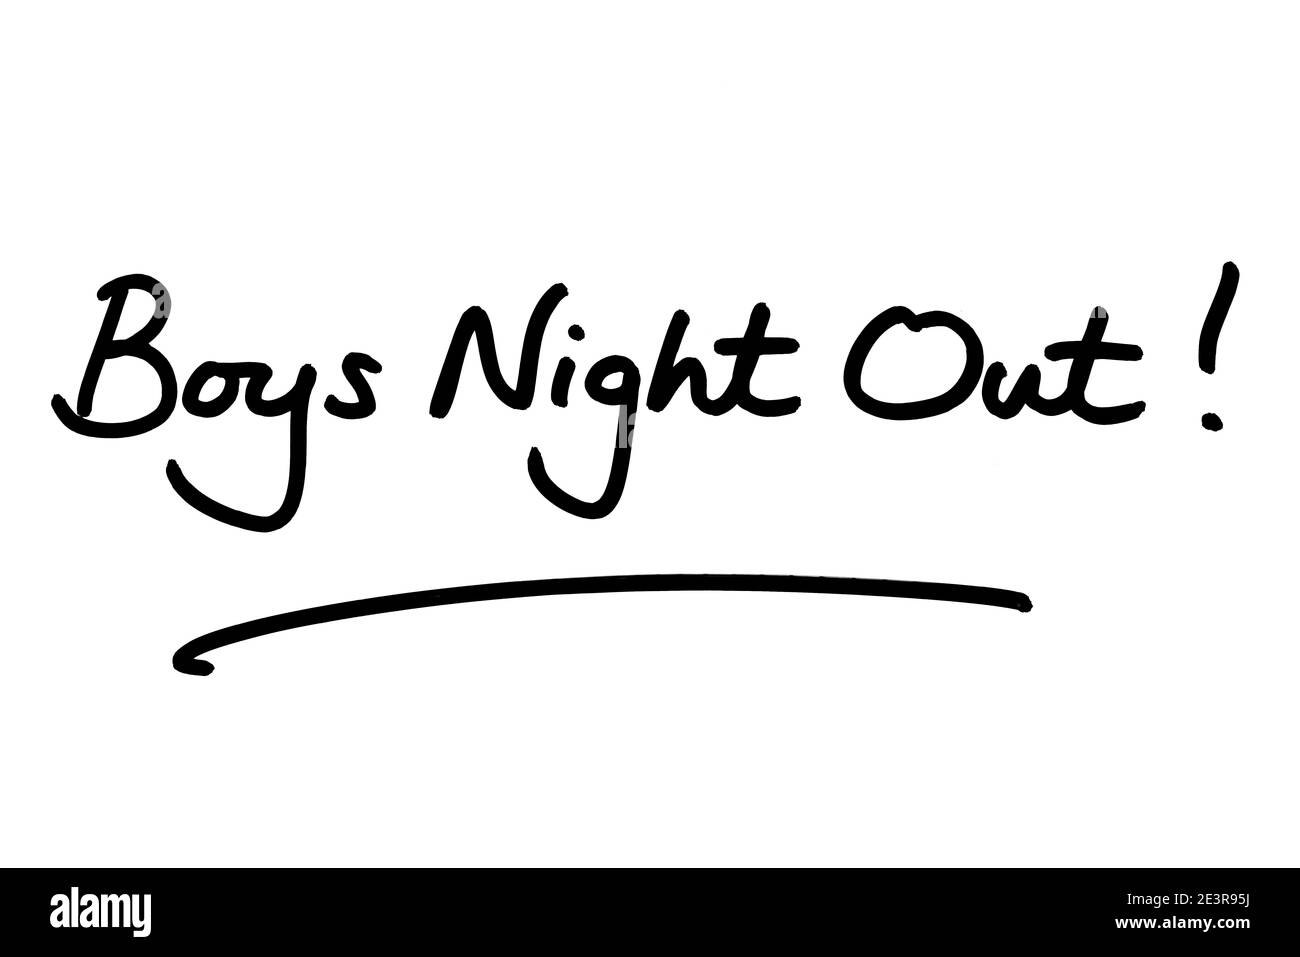 Boys Night Out! handwritten on a white background. Stock Photo